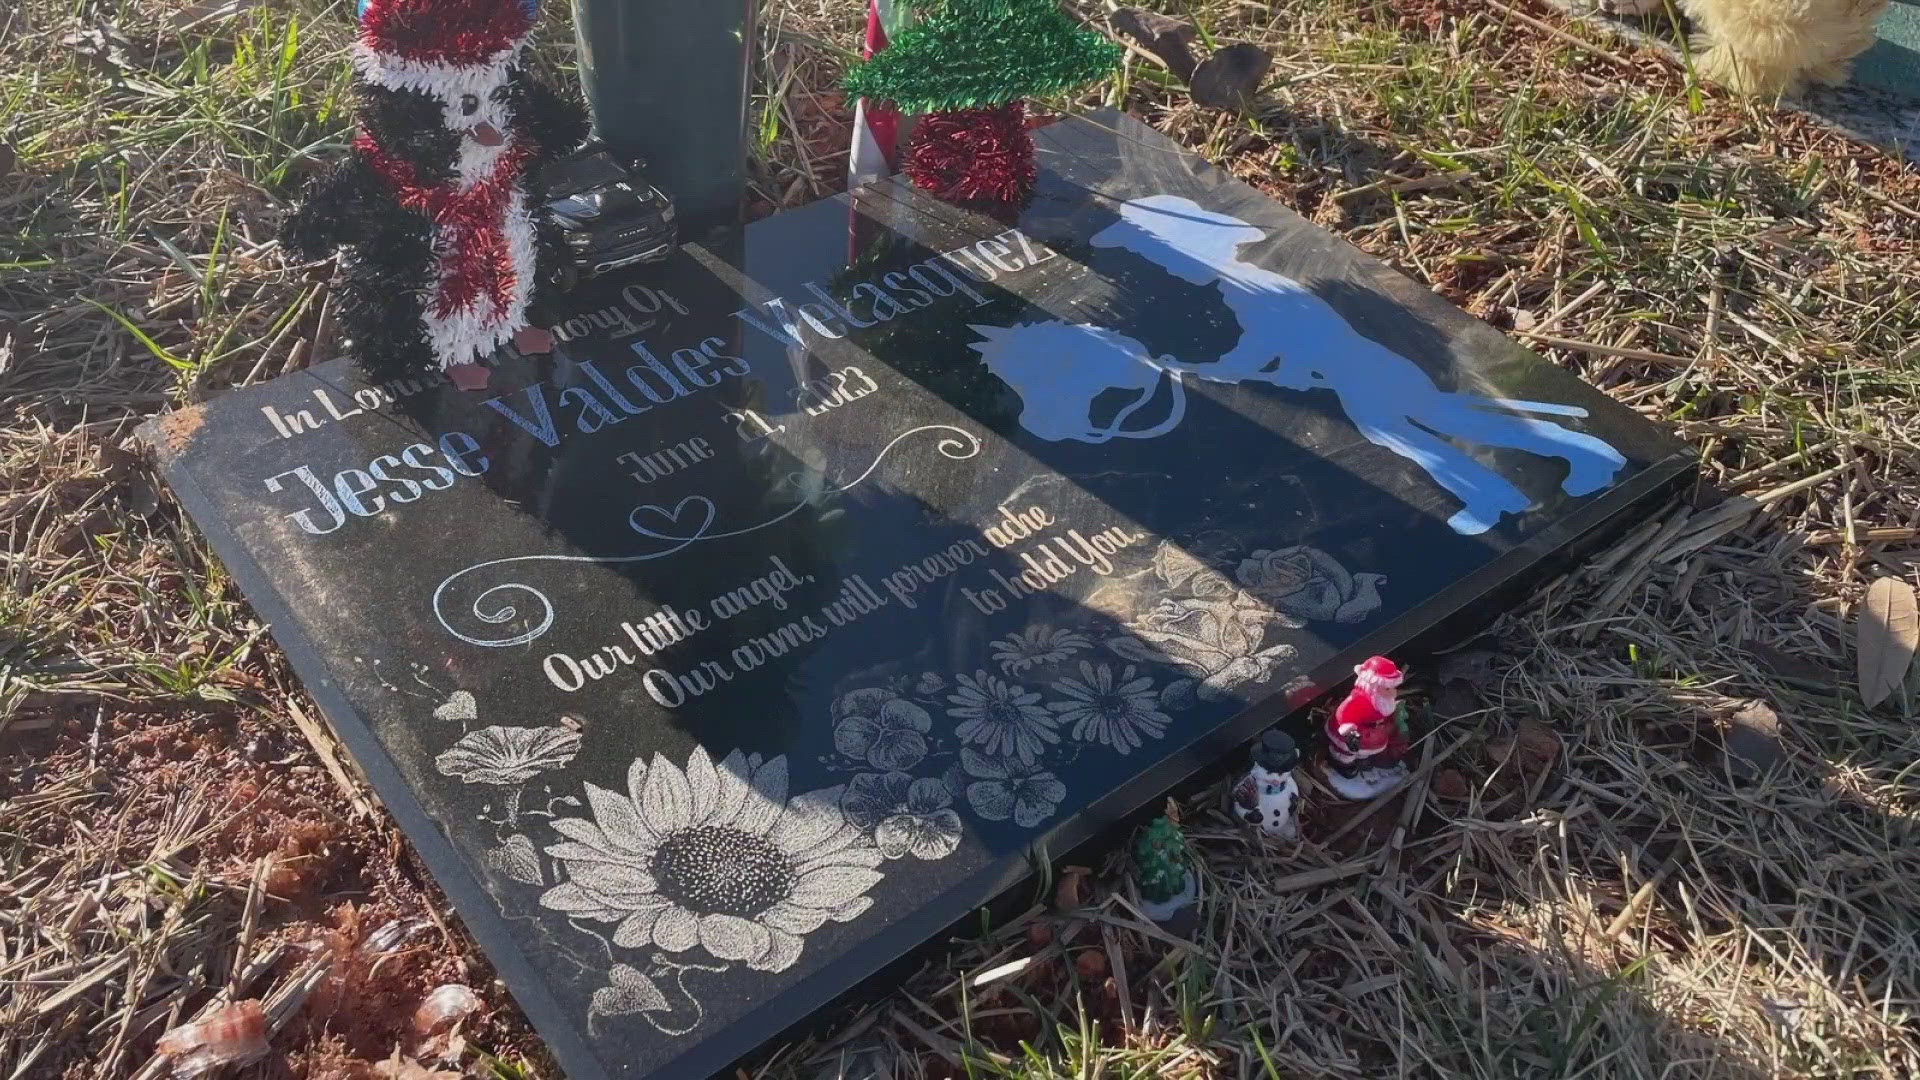 The Velasquez’s wanted a spot to remember the child they never met. It had to sort through problems with the cemetery first.